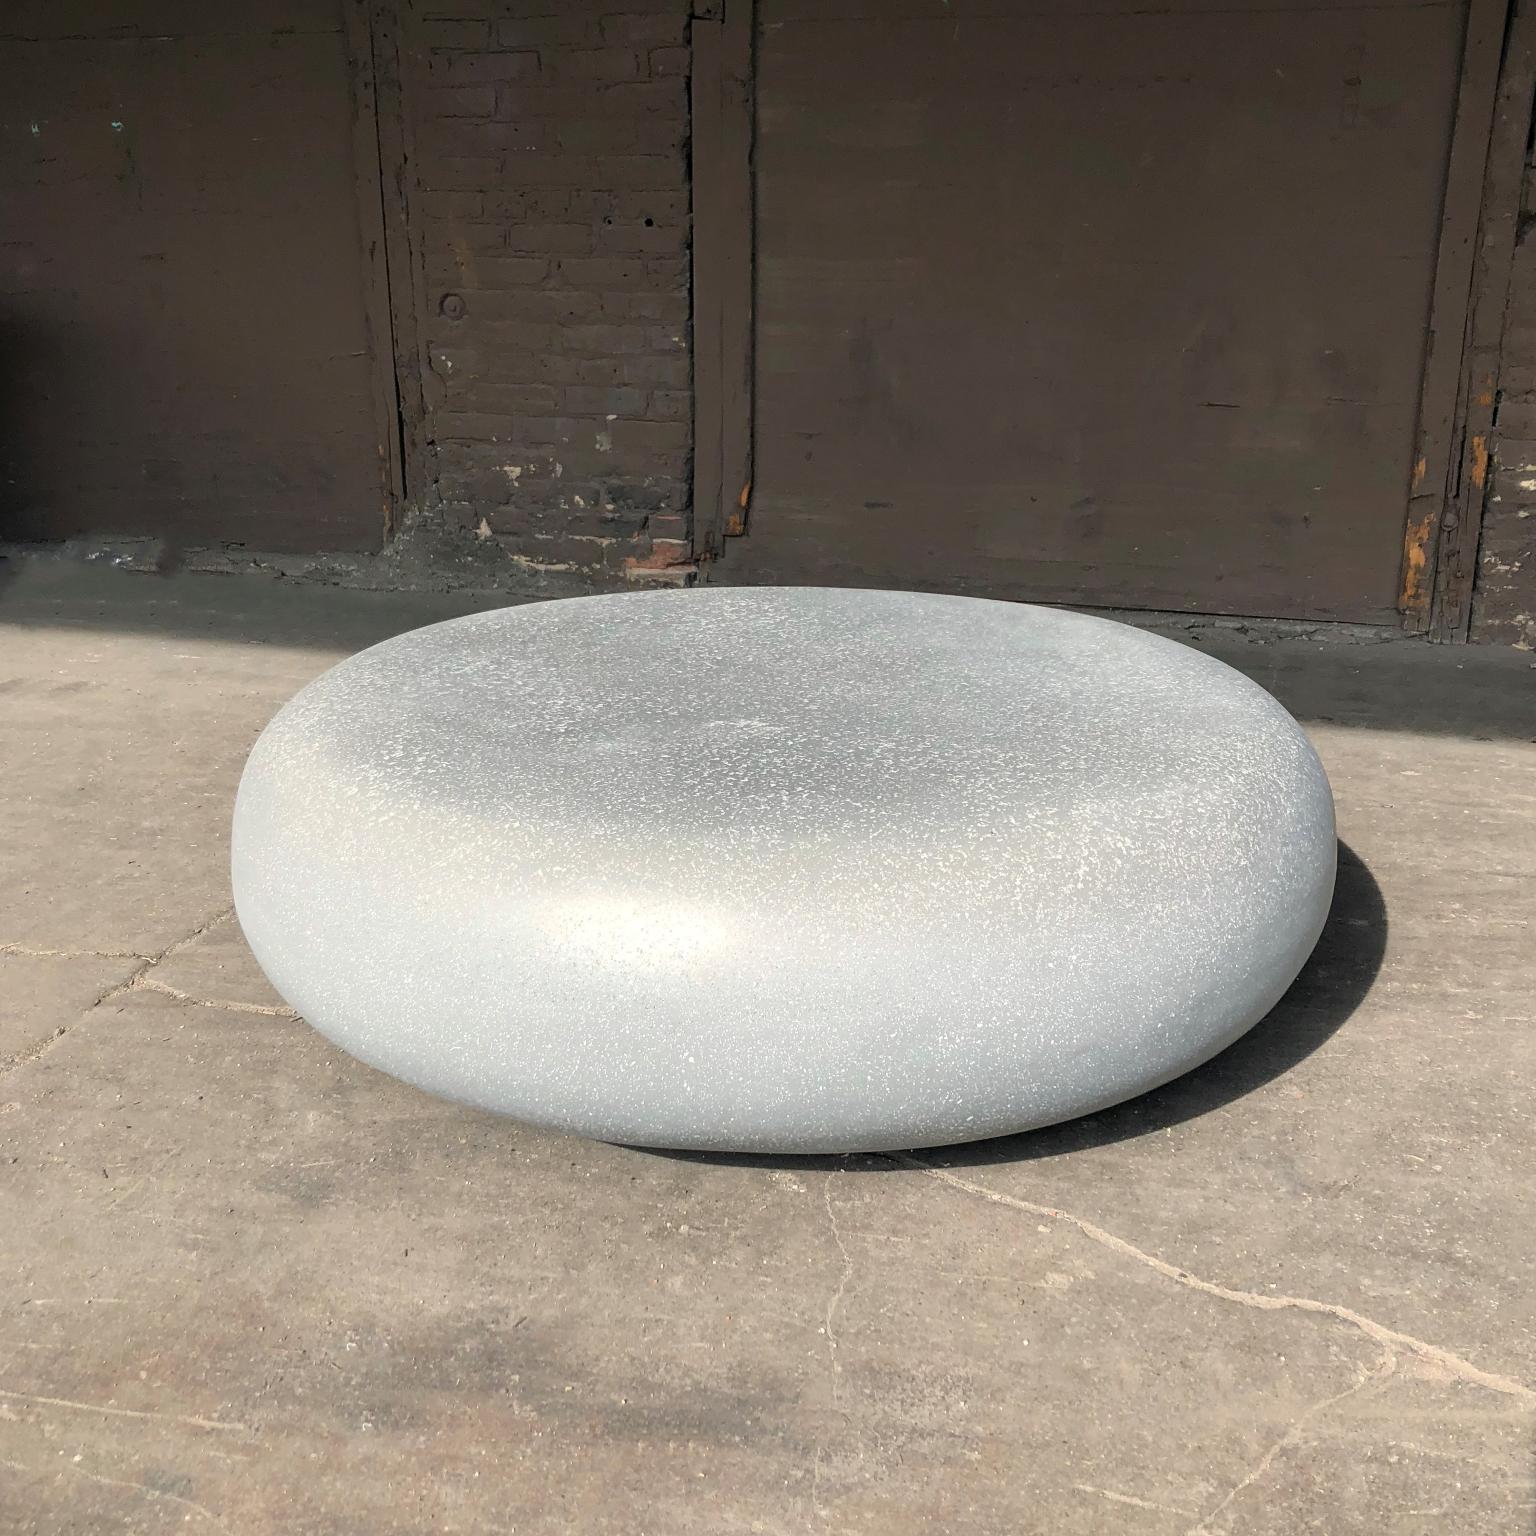 Like a stone from a stream, smoothed for millennia by the passing currents. The fluid potential of natural power emanates from its presence.

Dimensions: Diameter 48 in. (122 cm). Height 15 in. (38 cm). Weight 70 lbs. (32 kg).

Finish color